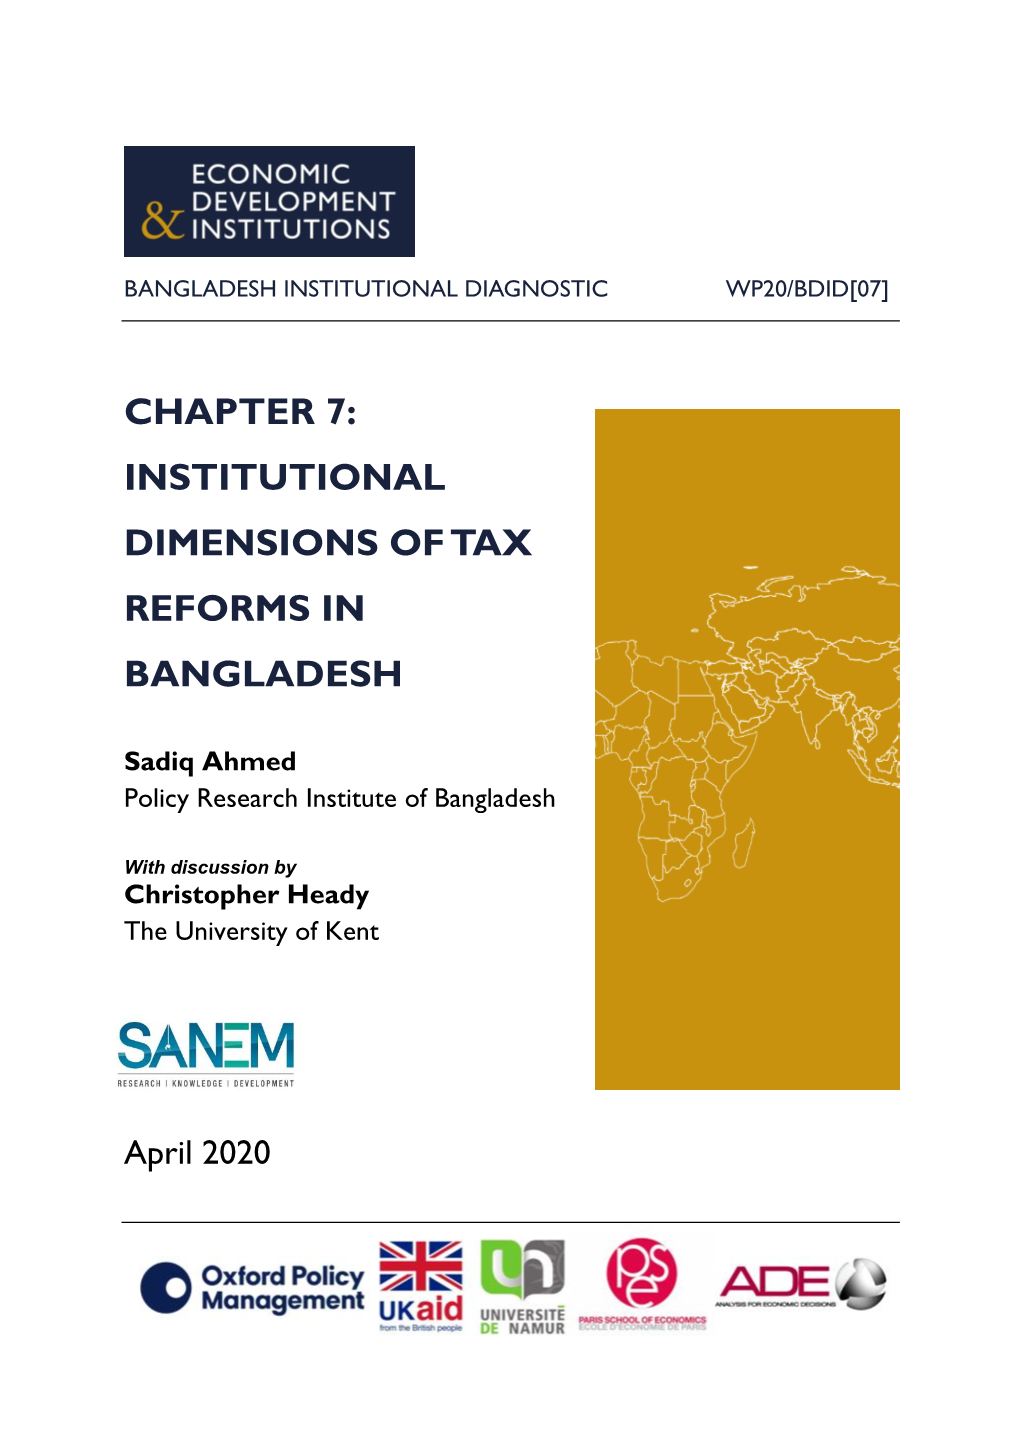 Chapter 7: Institutional Dimensions of Tax Reforms in Bangladesh